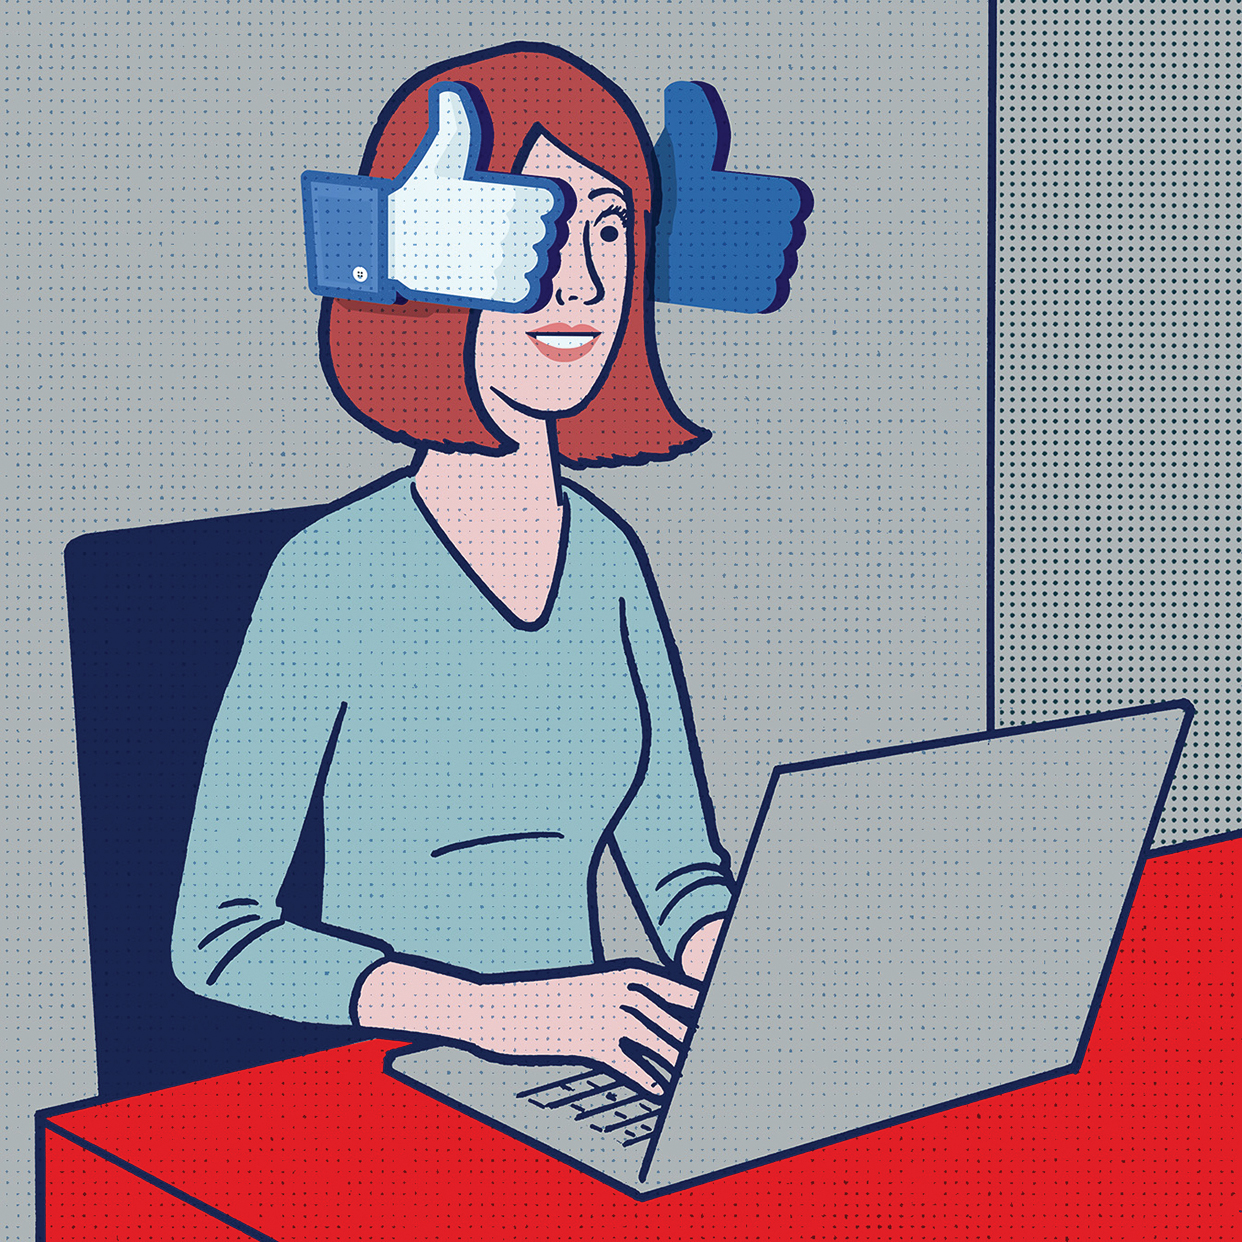 A woman sits at a desk with a laptop in front of her. Around her head are blinders in the shape of a Facebook like button